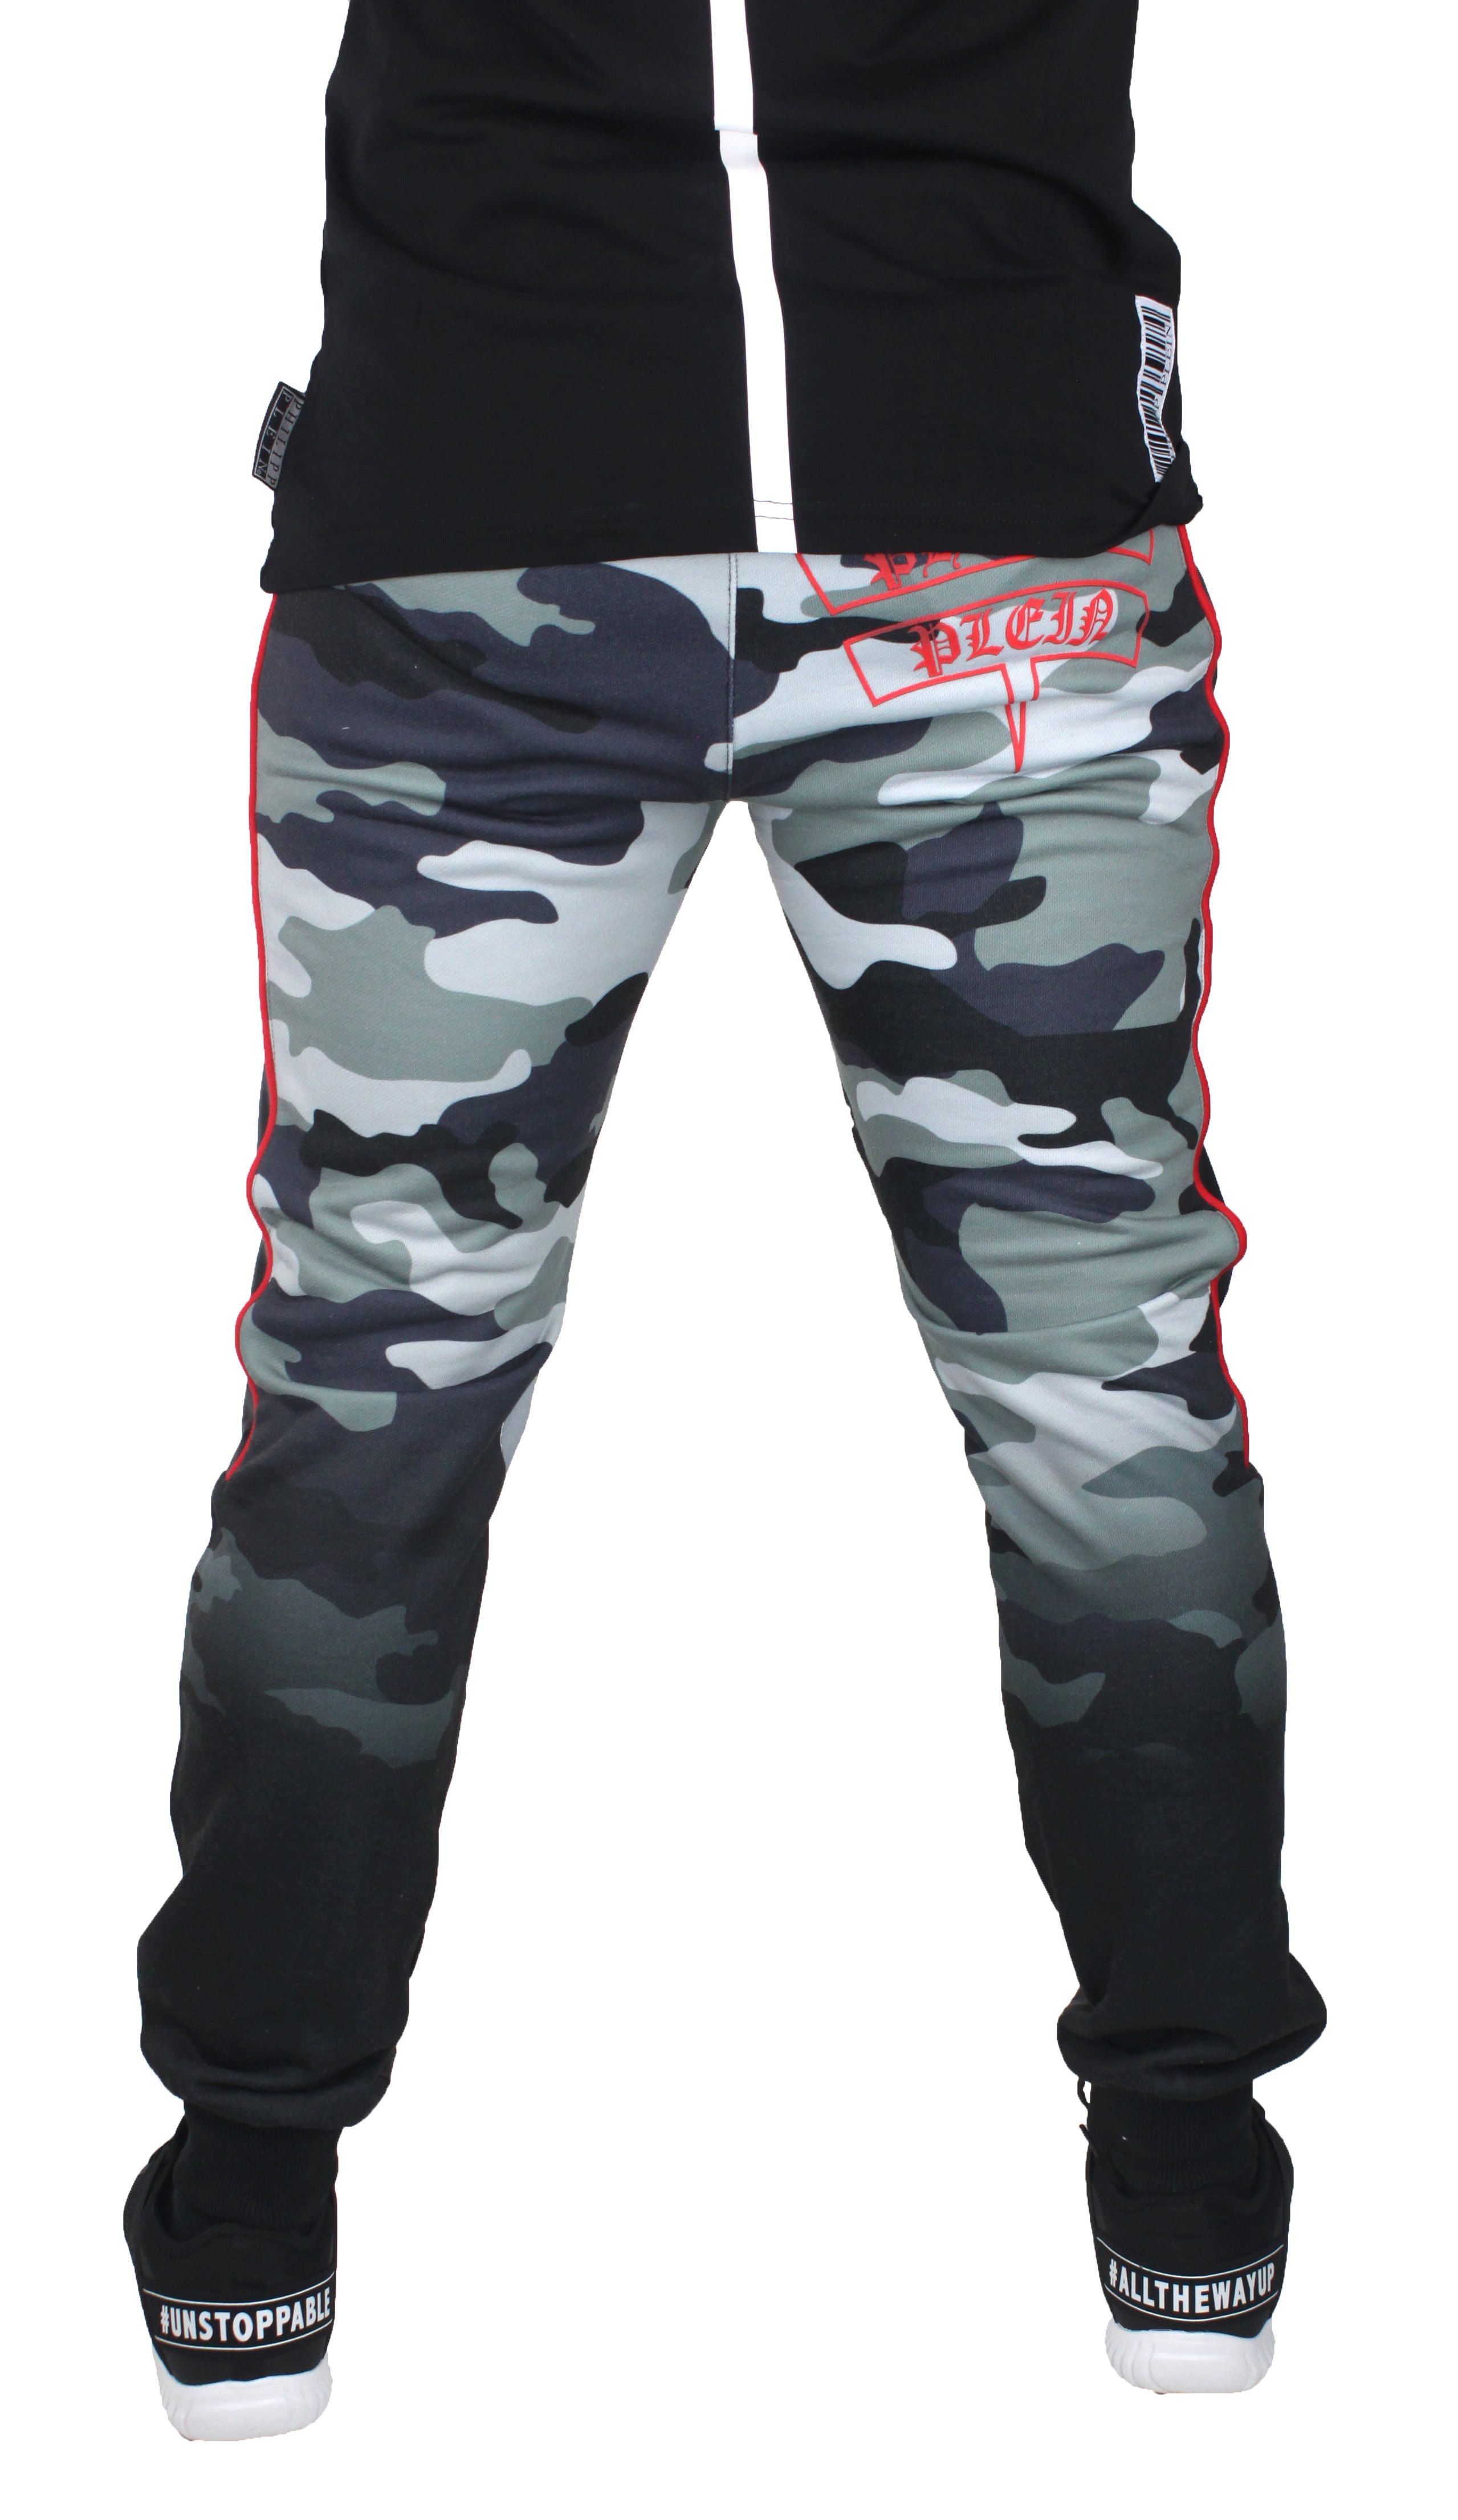 Philipp Plein MJT0171 Raitaro CM99 Sweat Pants. Philipp Plein Green Camo Sweat Pants. 100% Cotton. Iconic prints on the front and the back embellished in diamantes. Metal plated logo on the back pocket. Green Camo Pattern